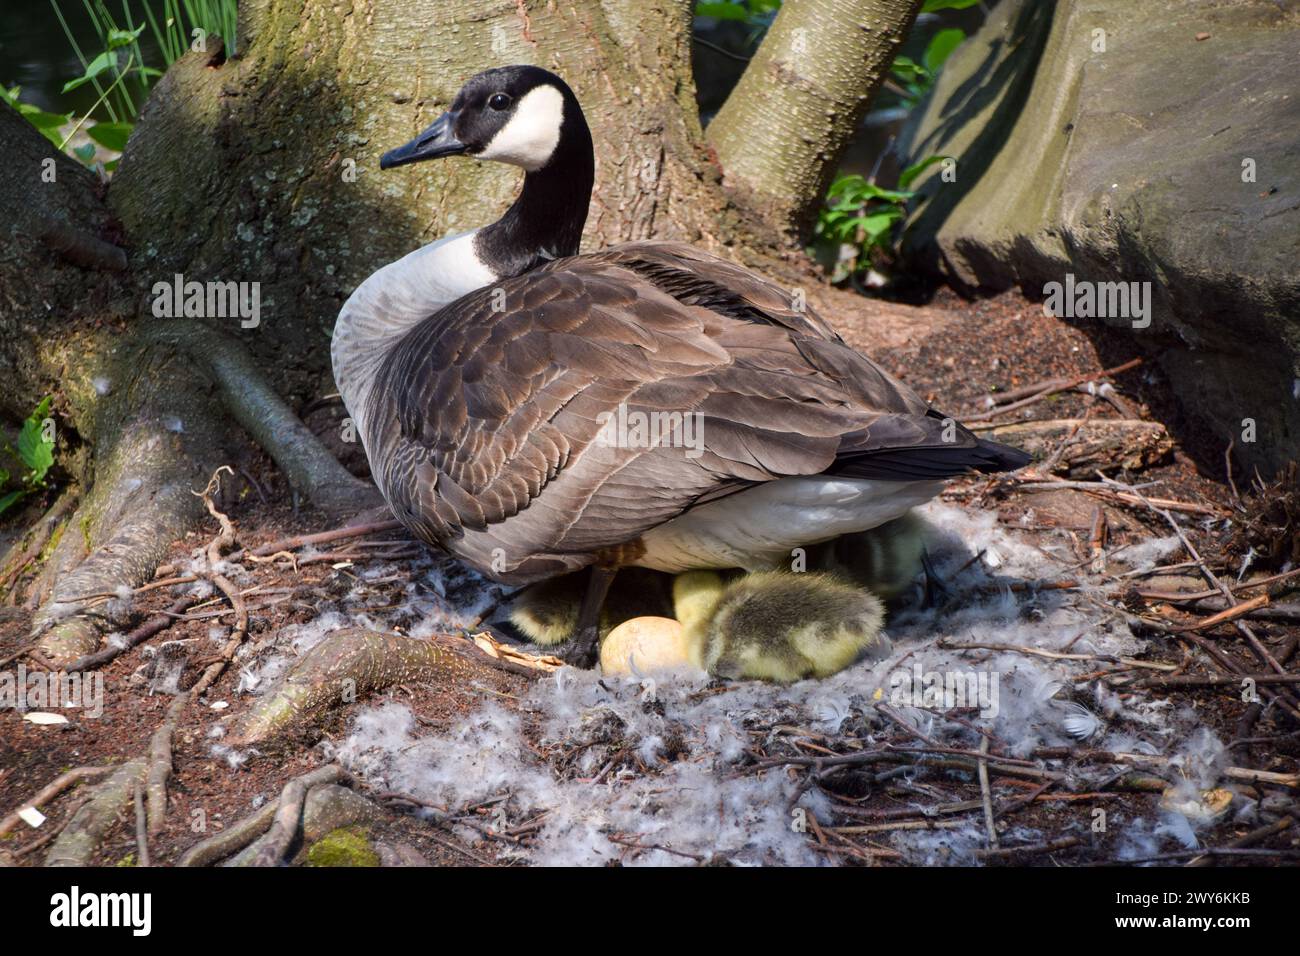 A mother Canada goose looks after her newborn babies in a nest in a park in Germany. Credit: Vuk Valcic/Alamy Stock Photo